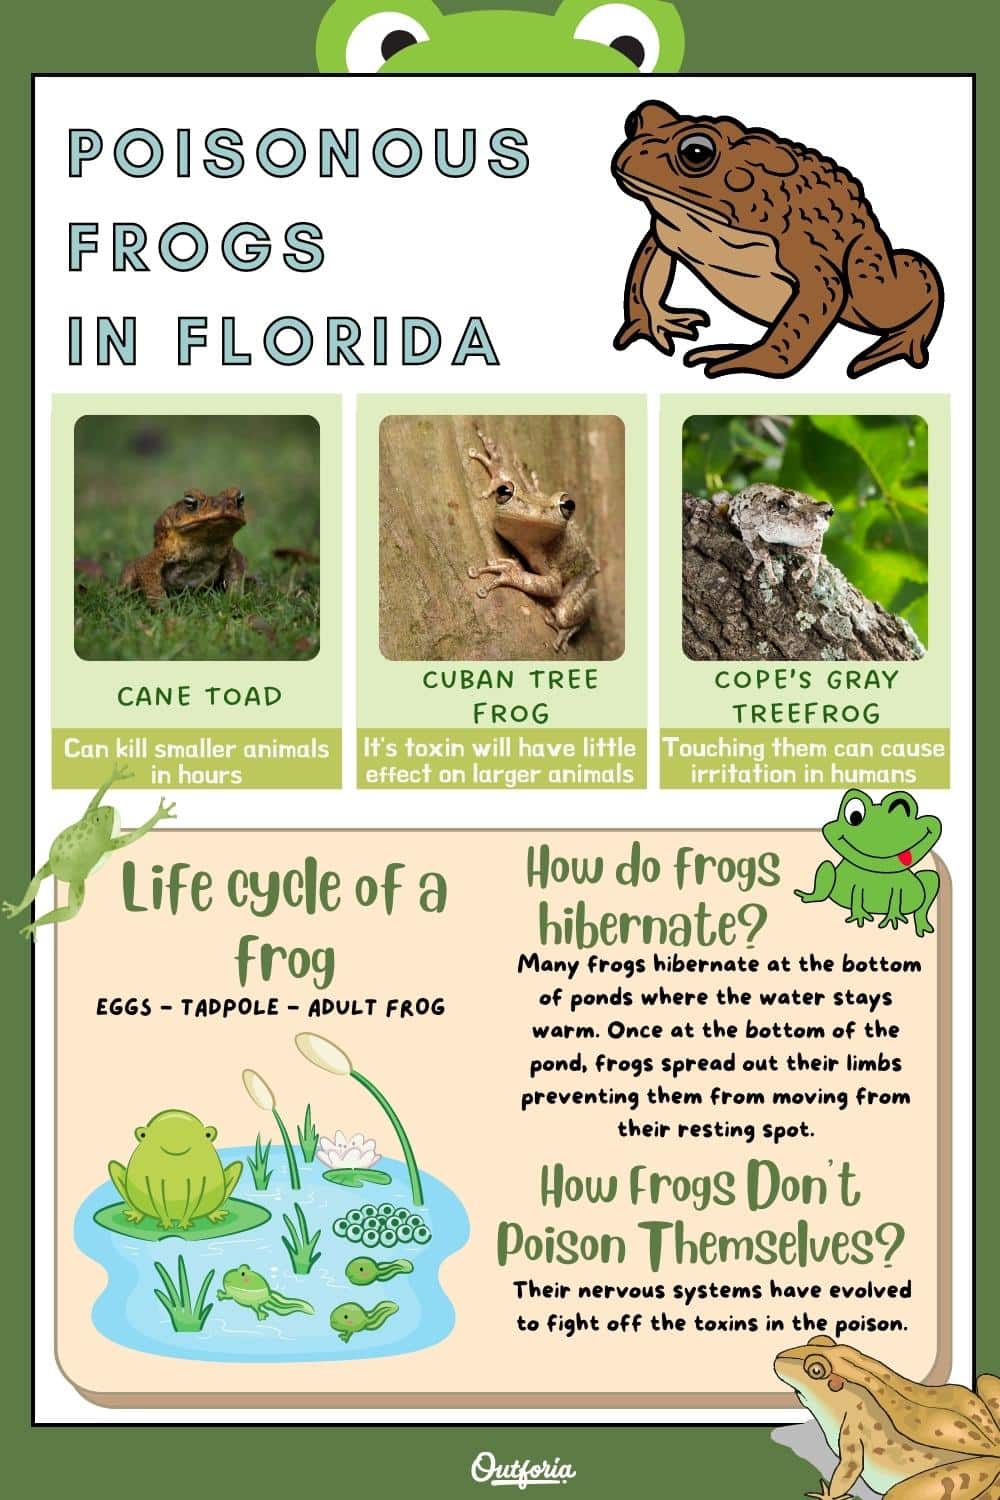 poisonous frogs in Florida chart with frog life cycle and facts